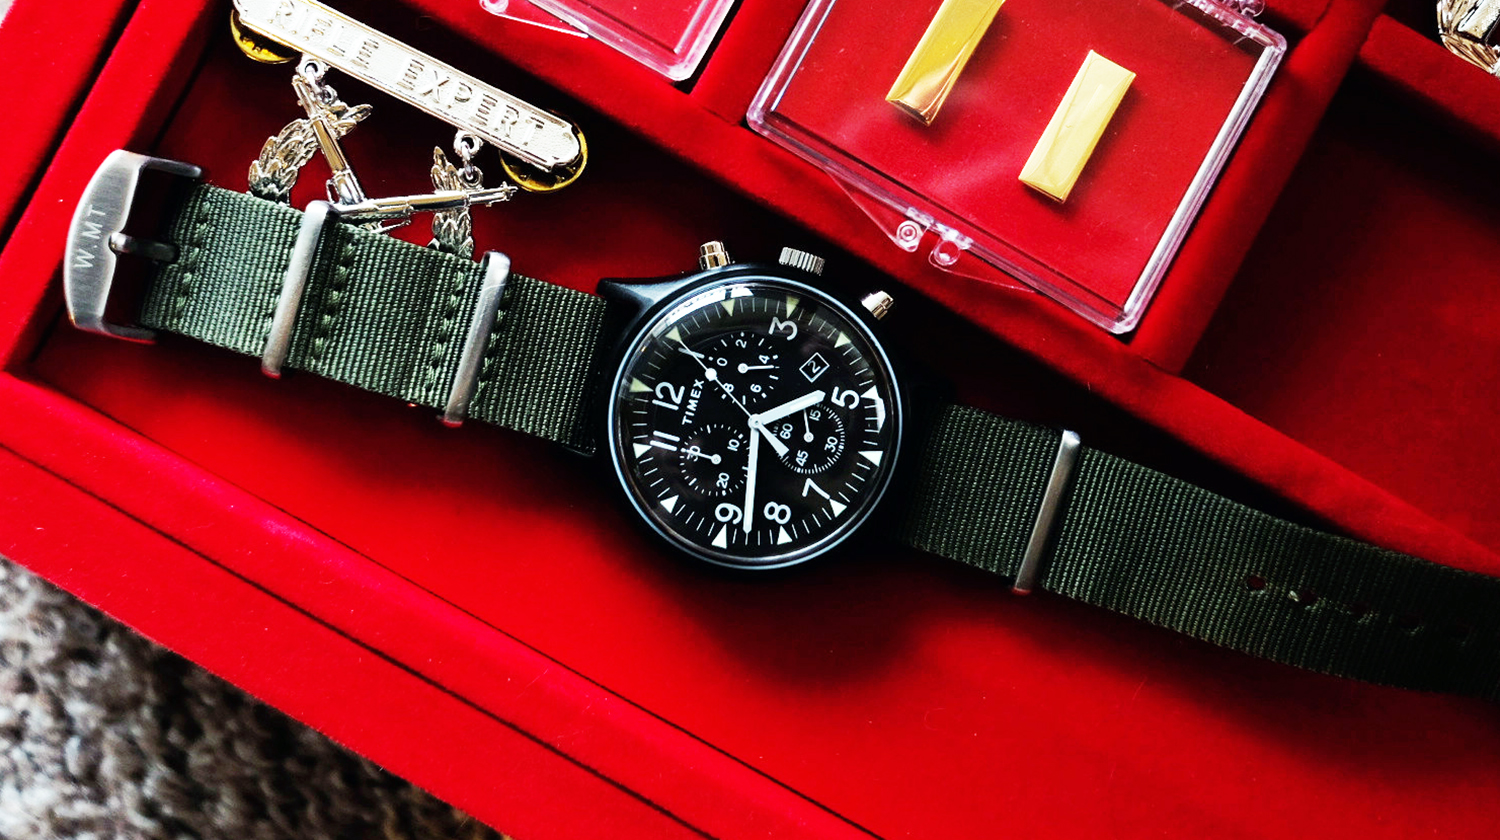 In Review: The Timex MK1 Chronograph Watch